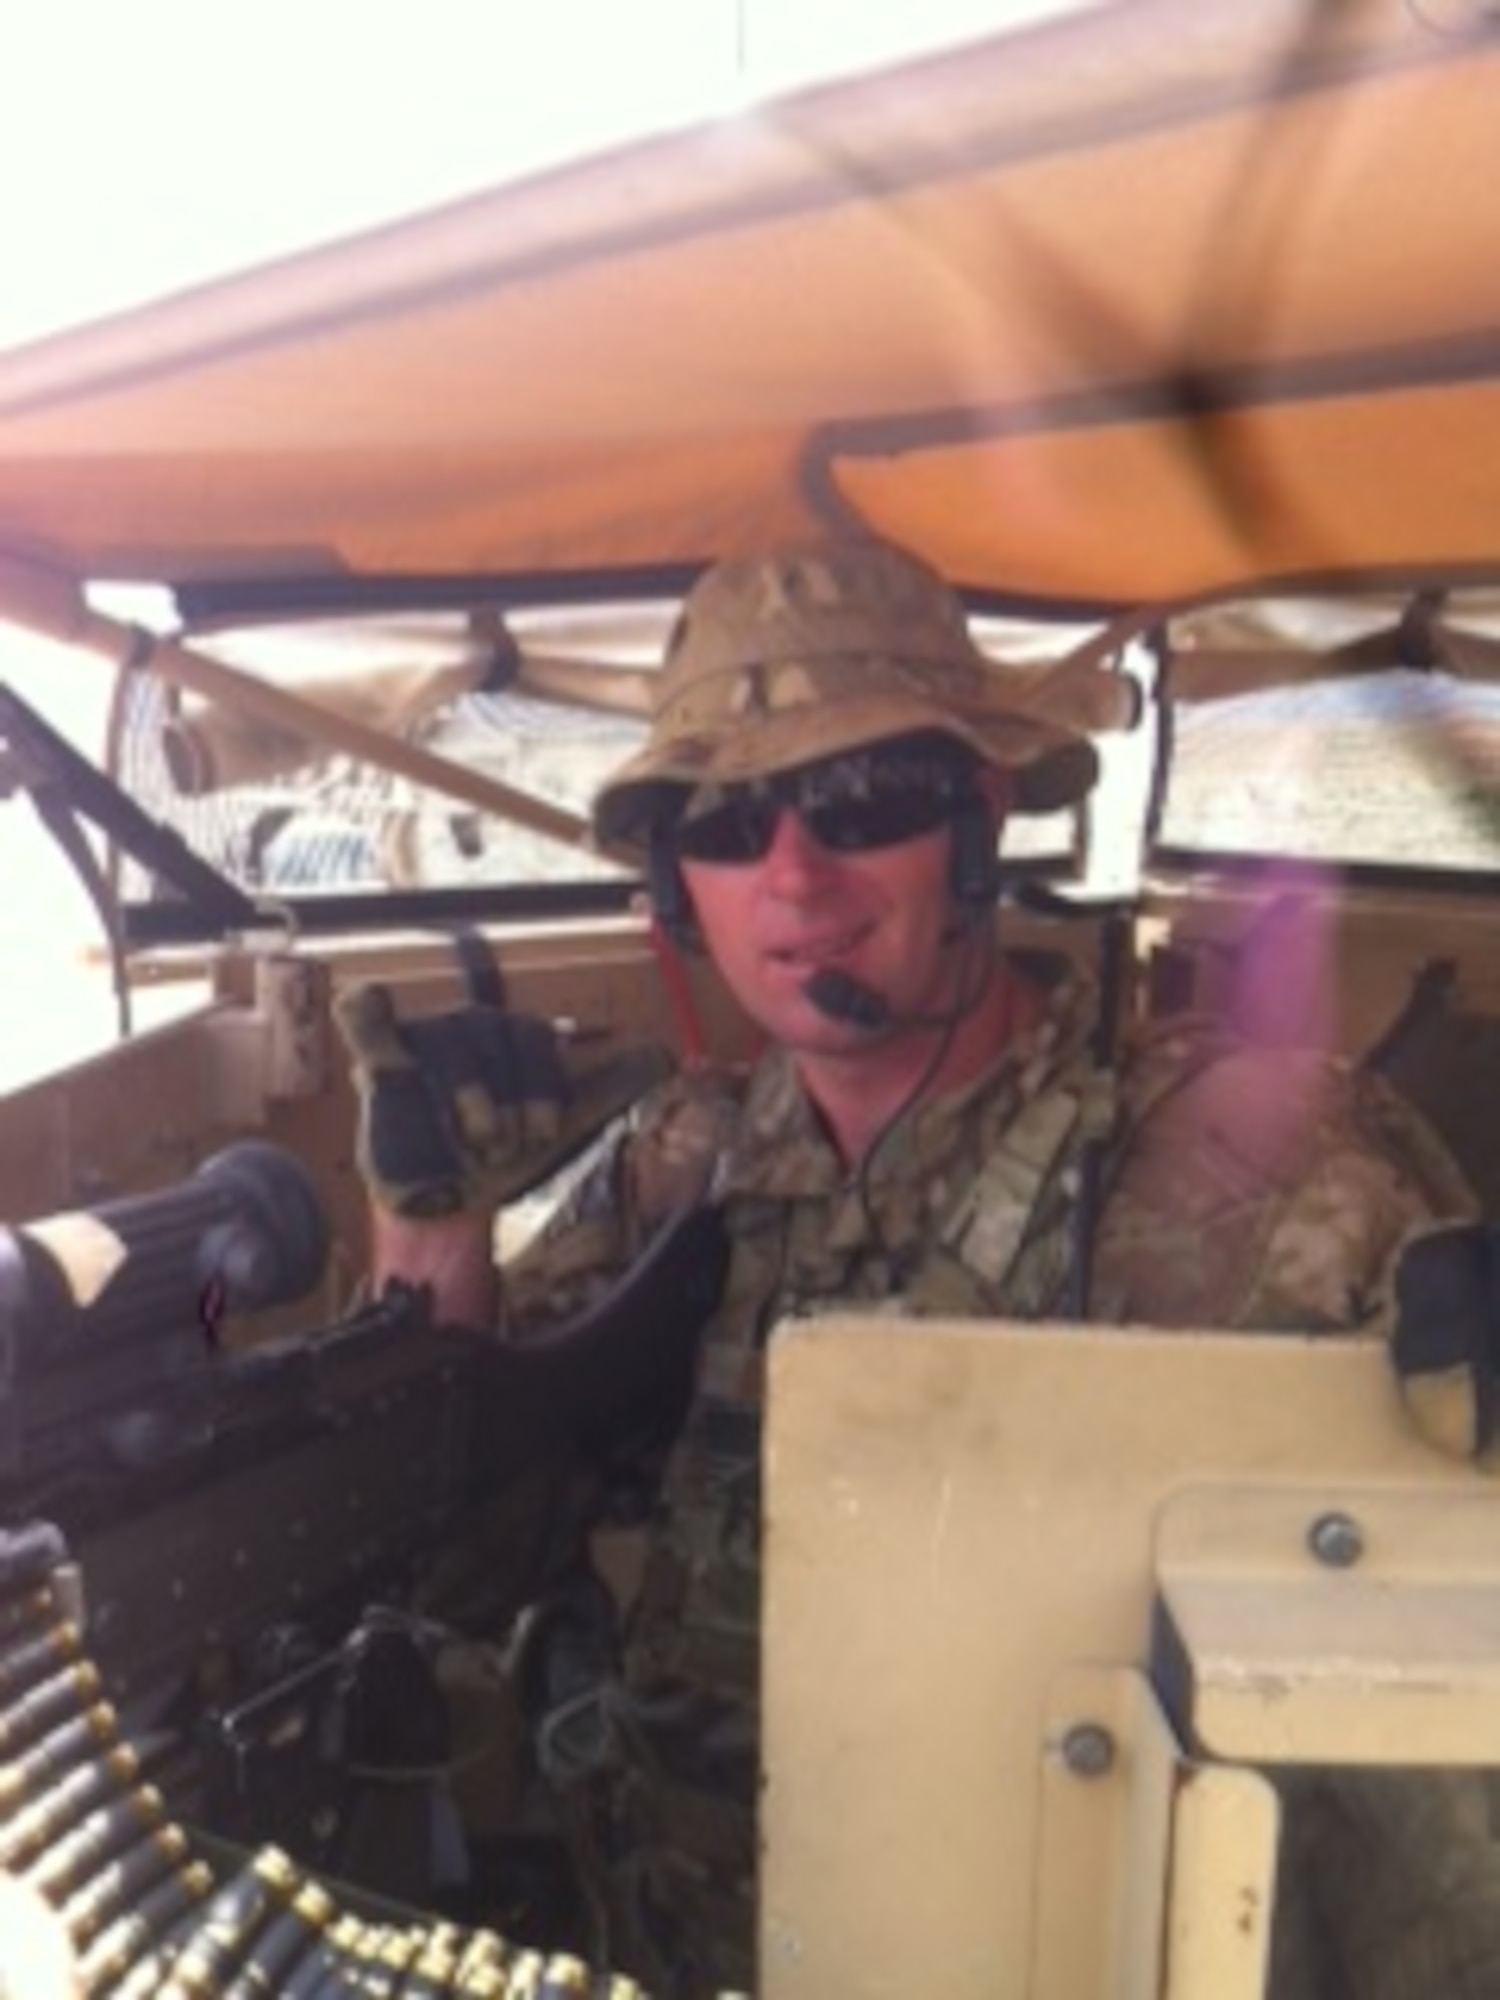 Tech. Sgt. Christopher Donohue on a mission in Afghanistan. (Courtesy photo)